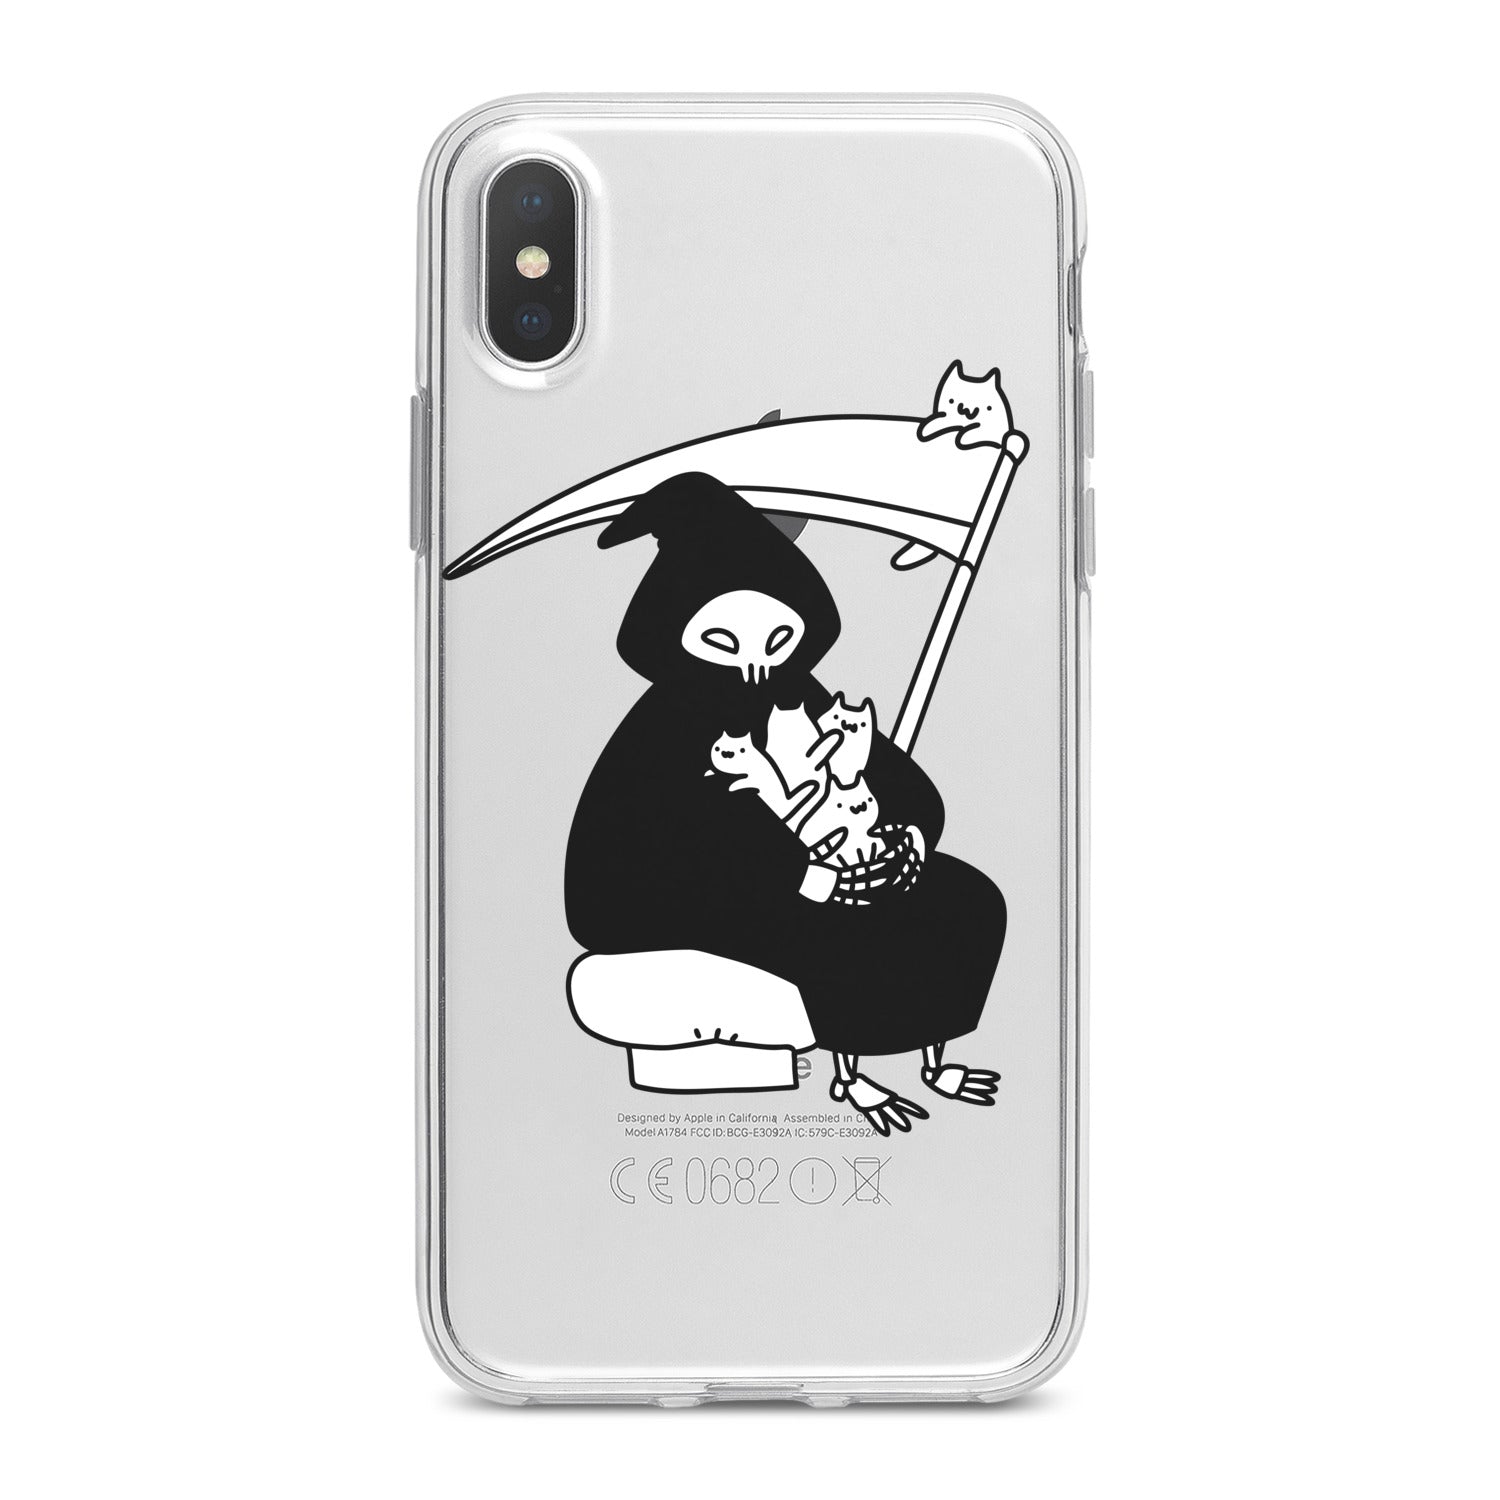 Lex Altern Cat Lover Phone Case for your iPhone & Android phone.